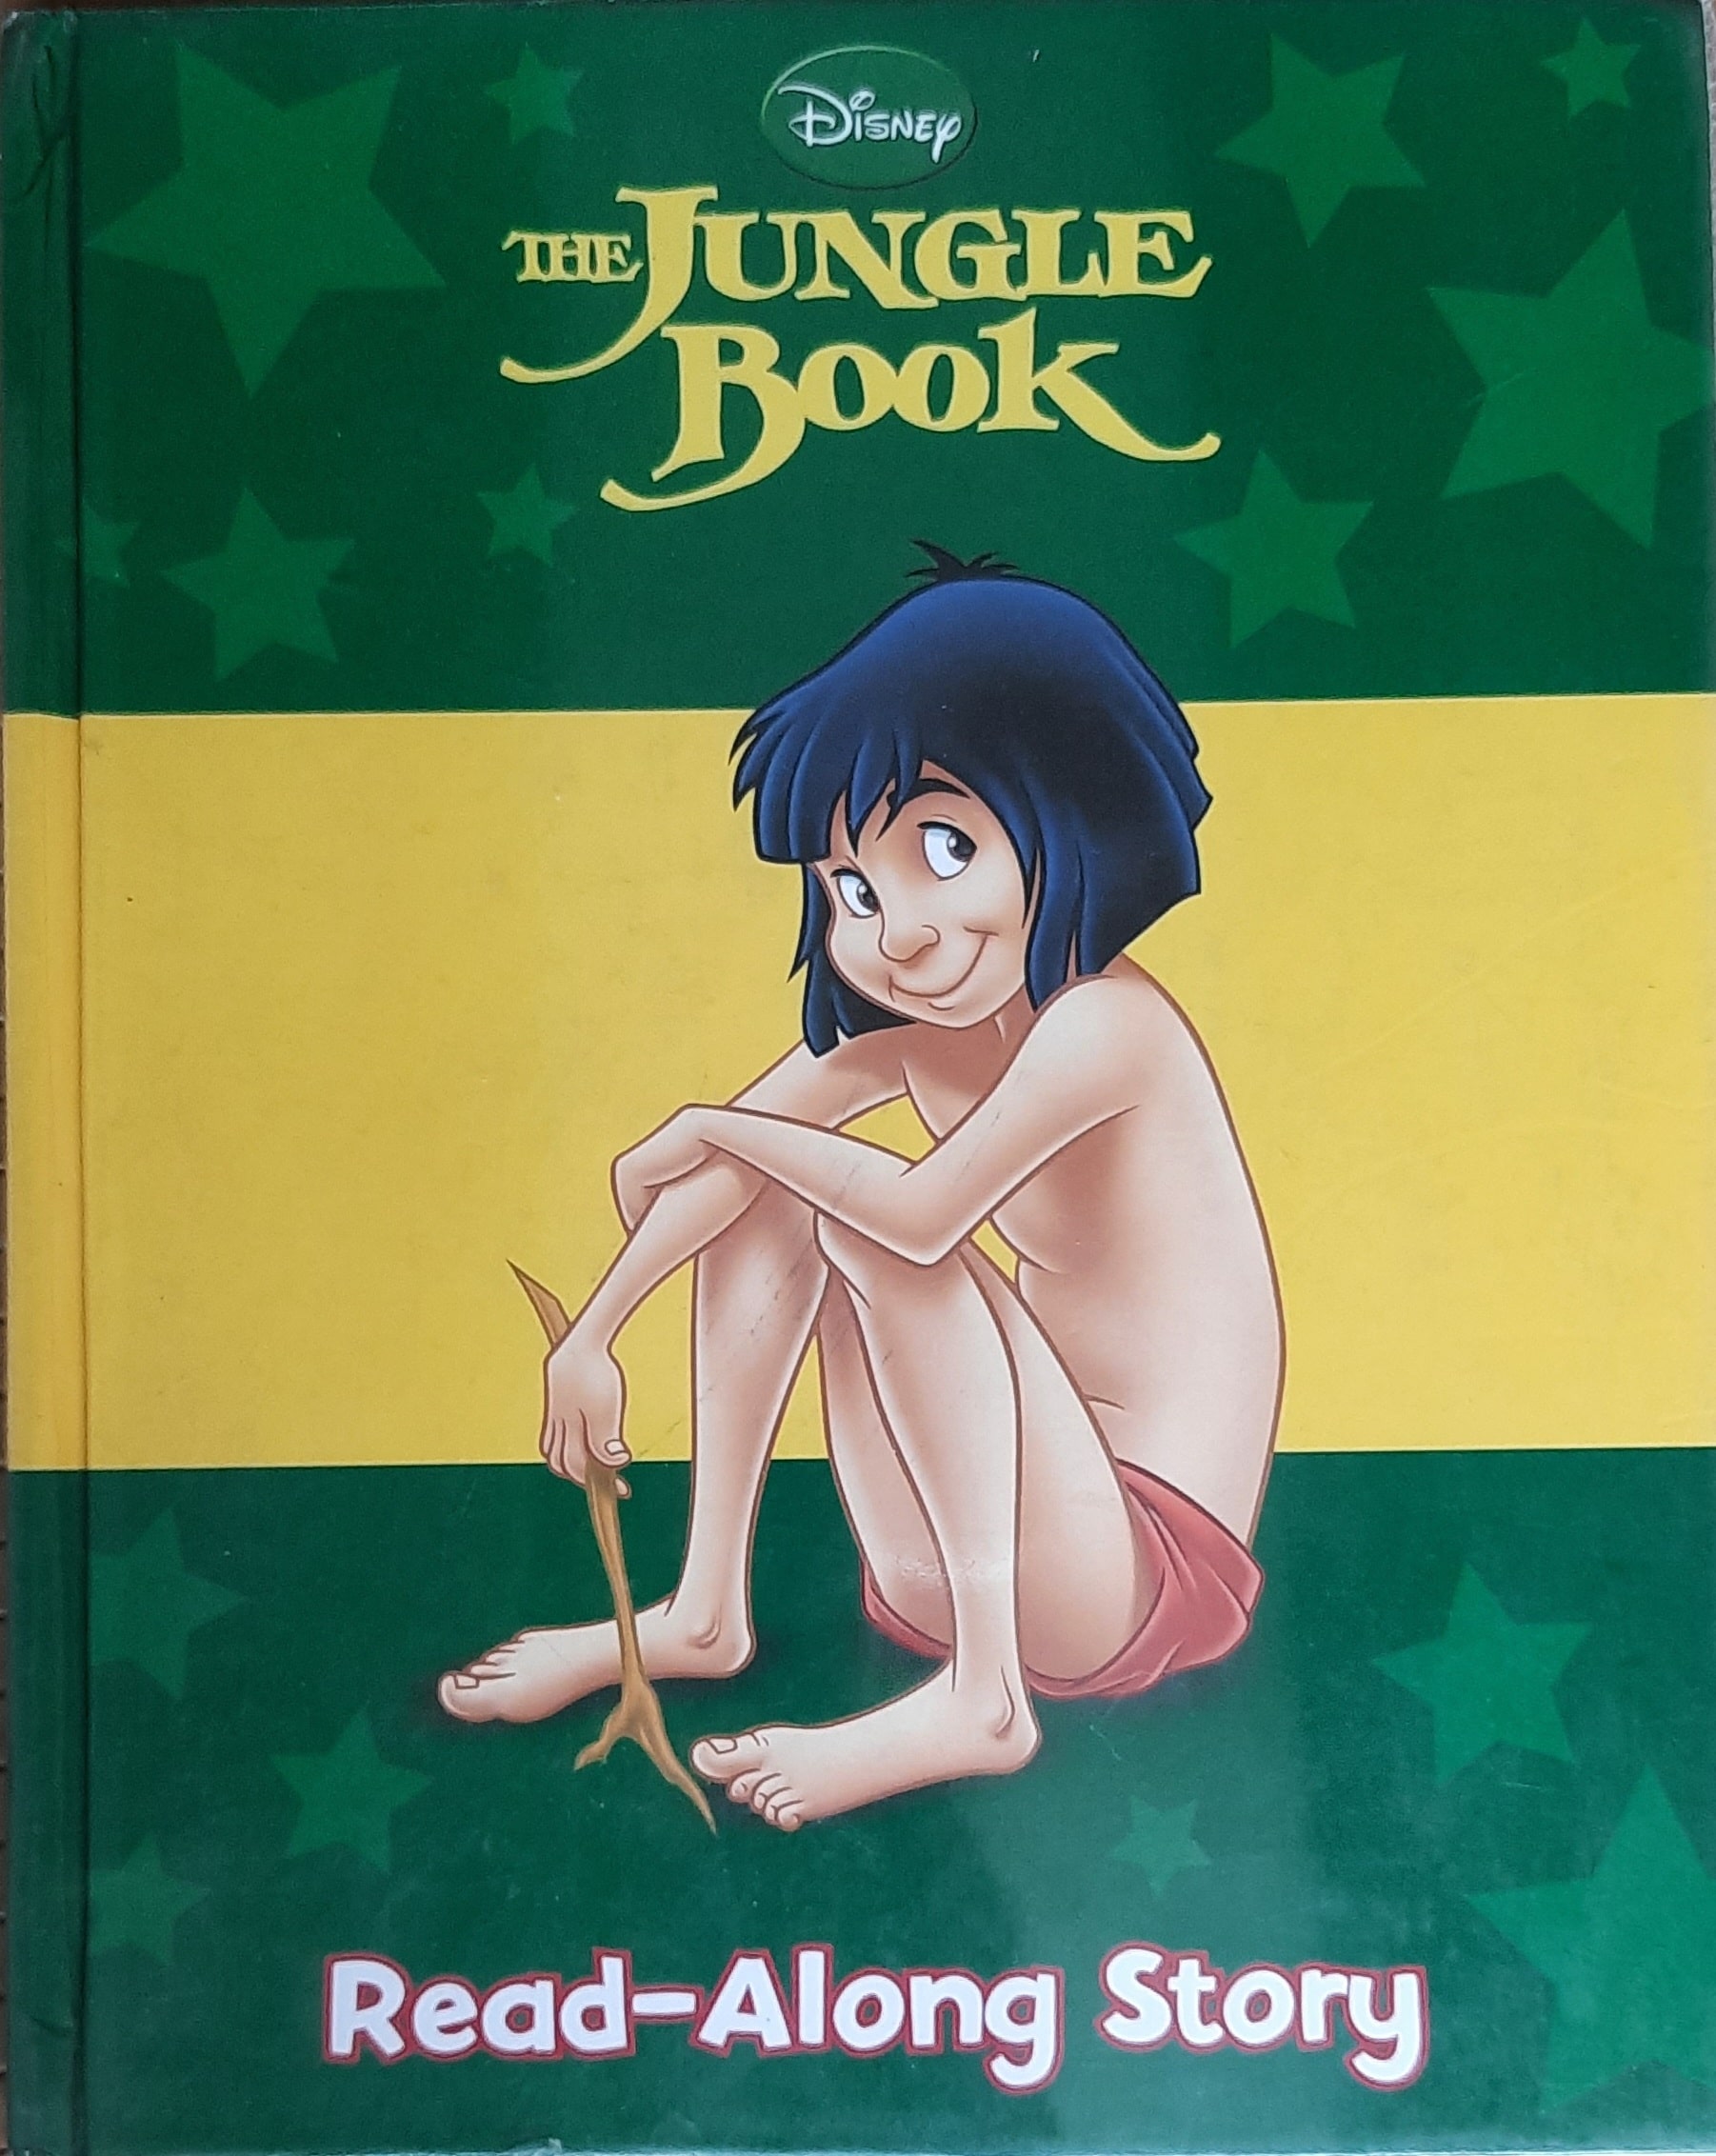 IMG : The Jungle Book